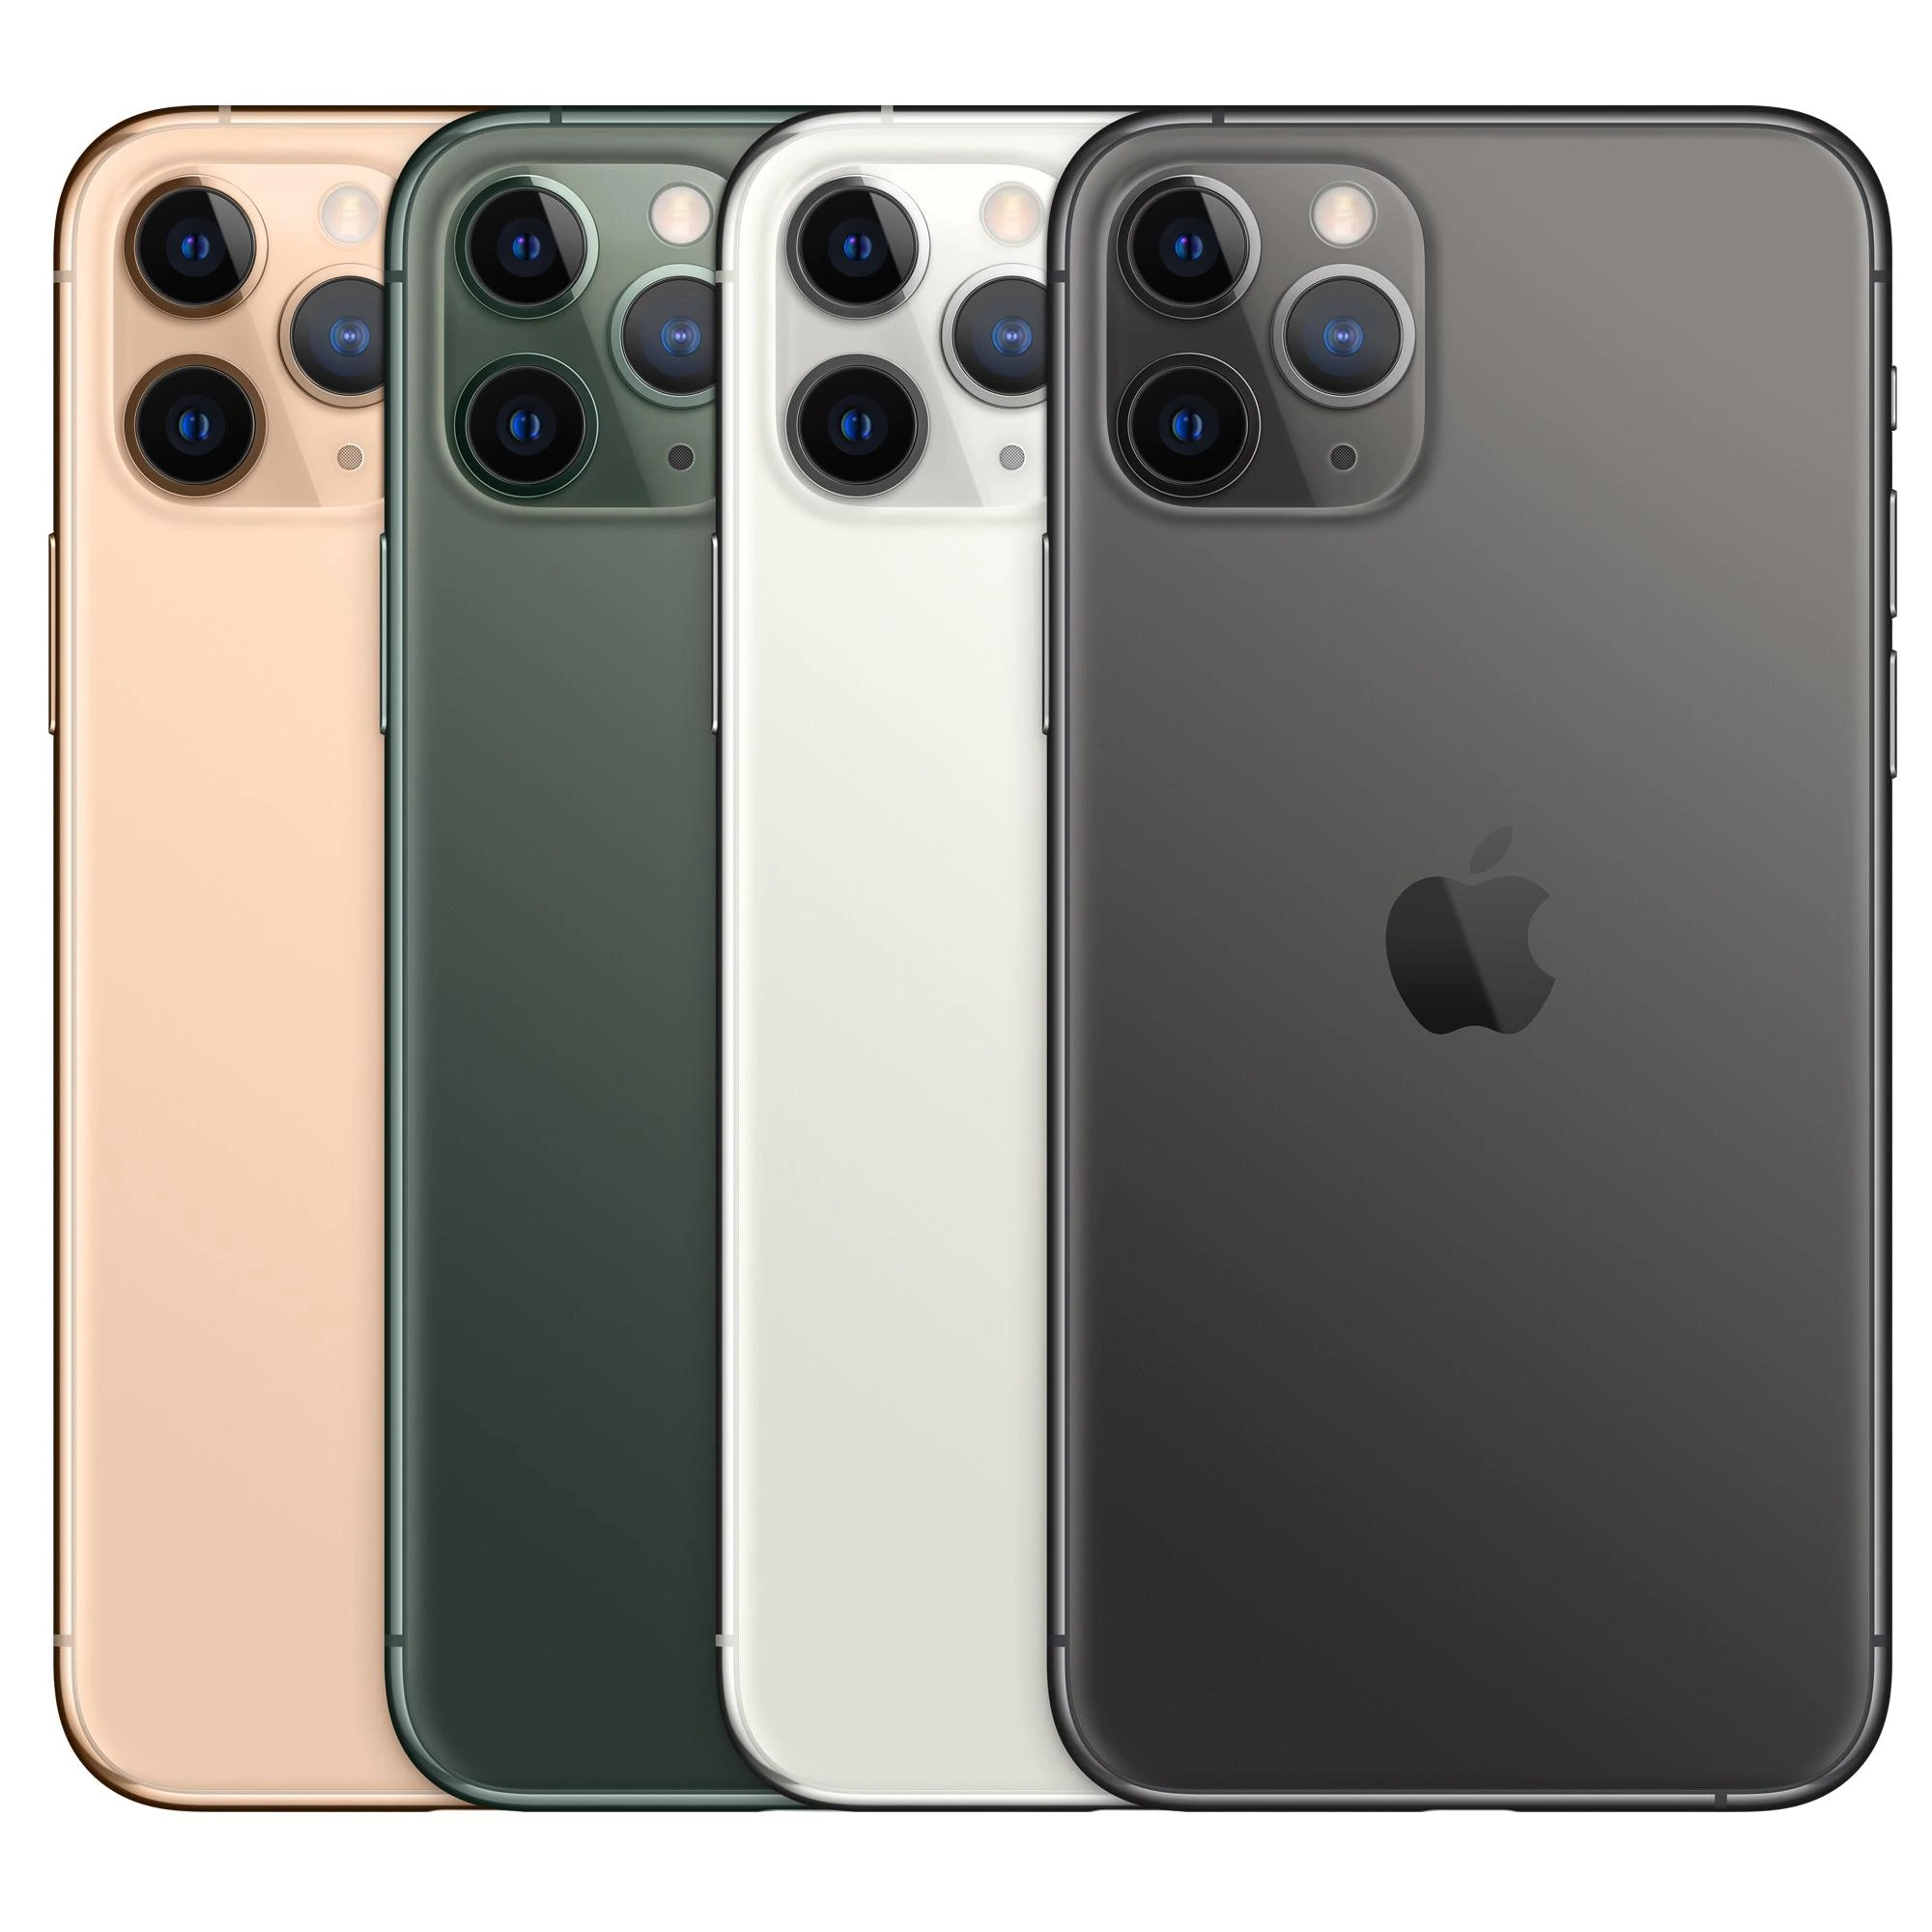 new iphone 12 versions